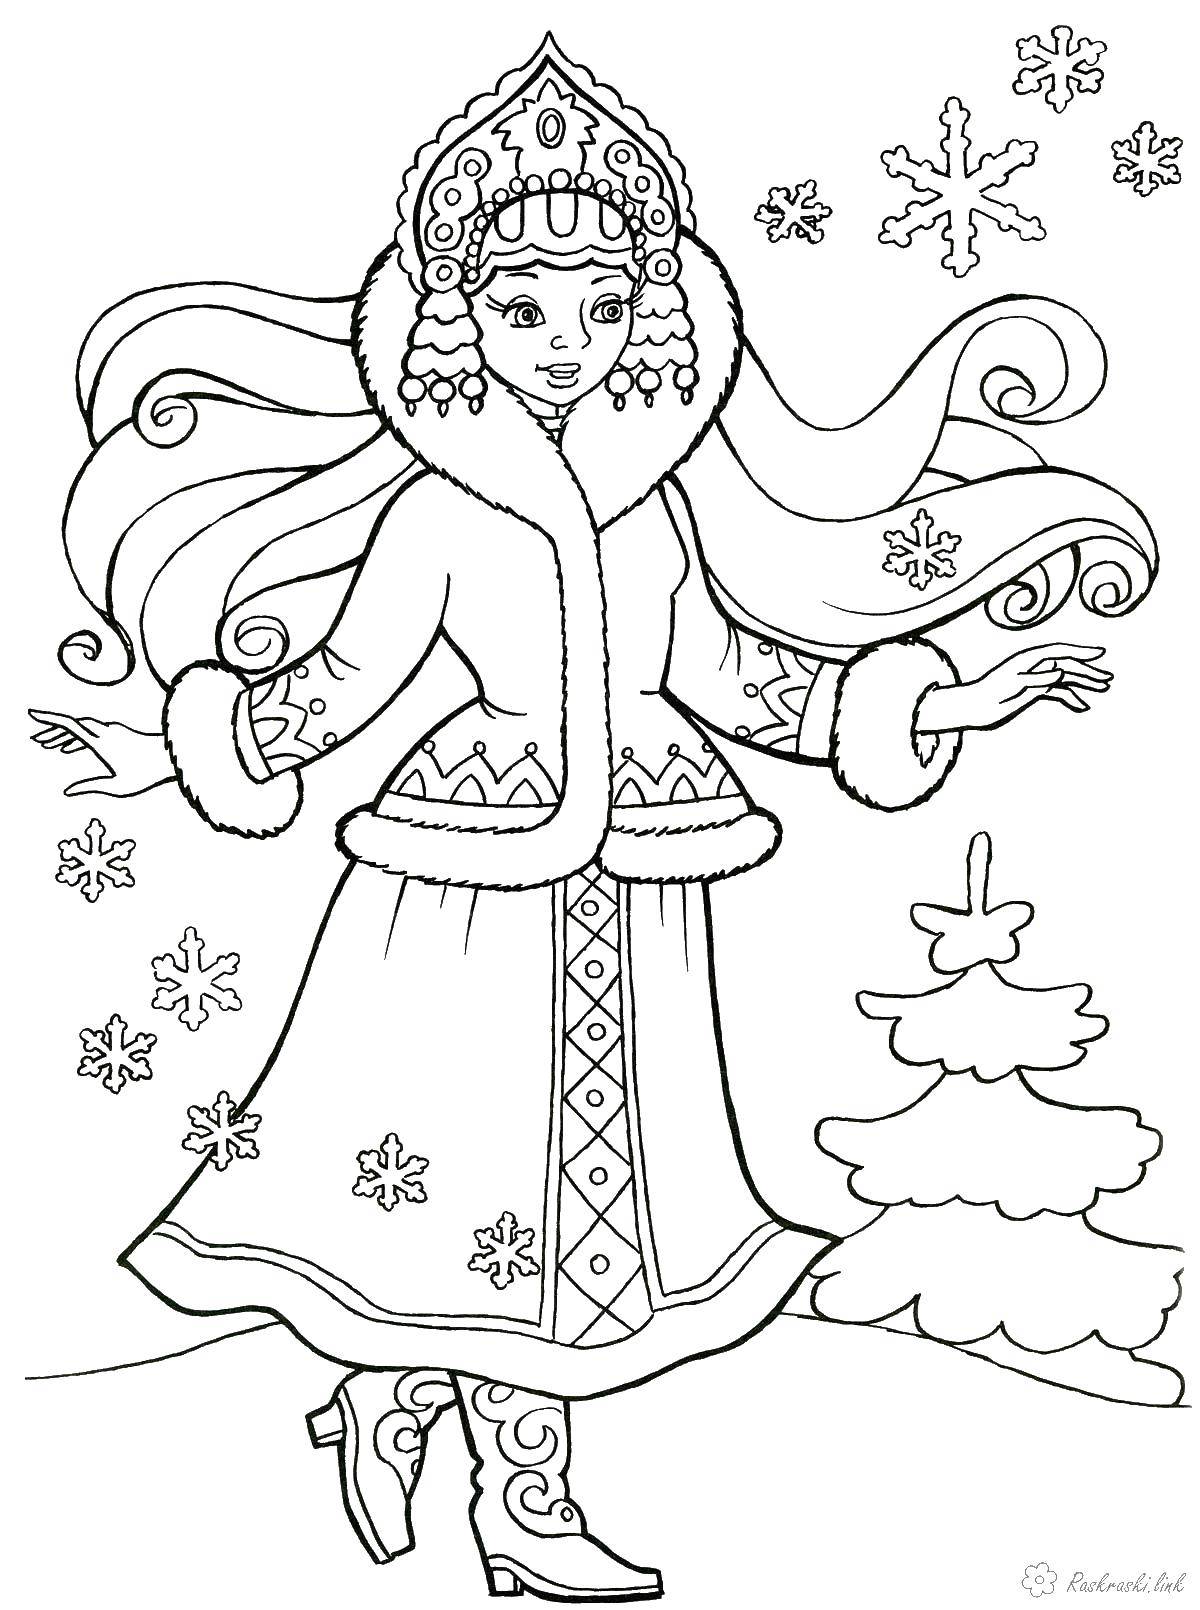 Coloring Maiden in a beautiful dress. Category clothing. Tags:  Snow maiden, winter, New Year.